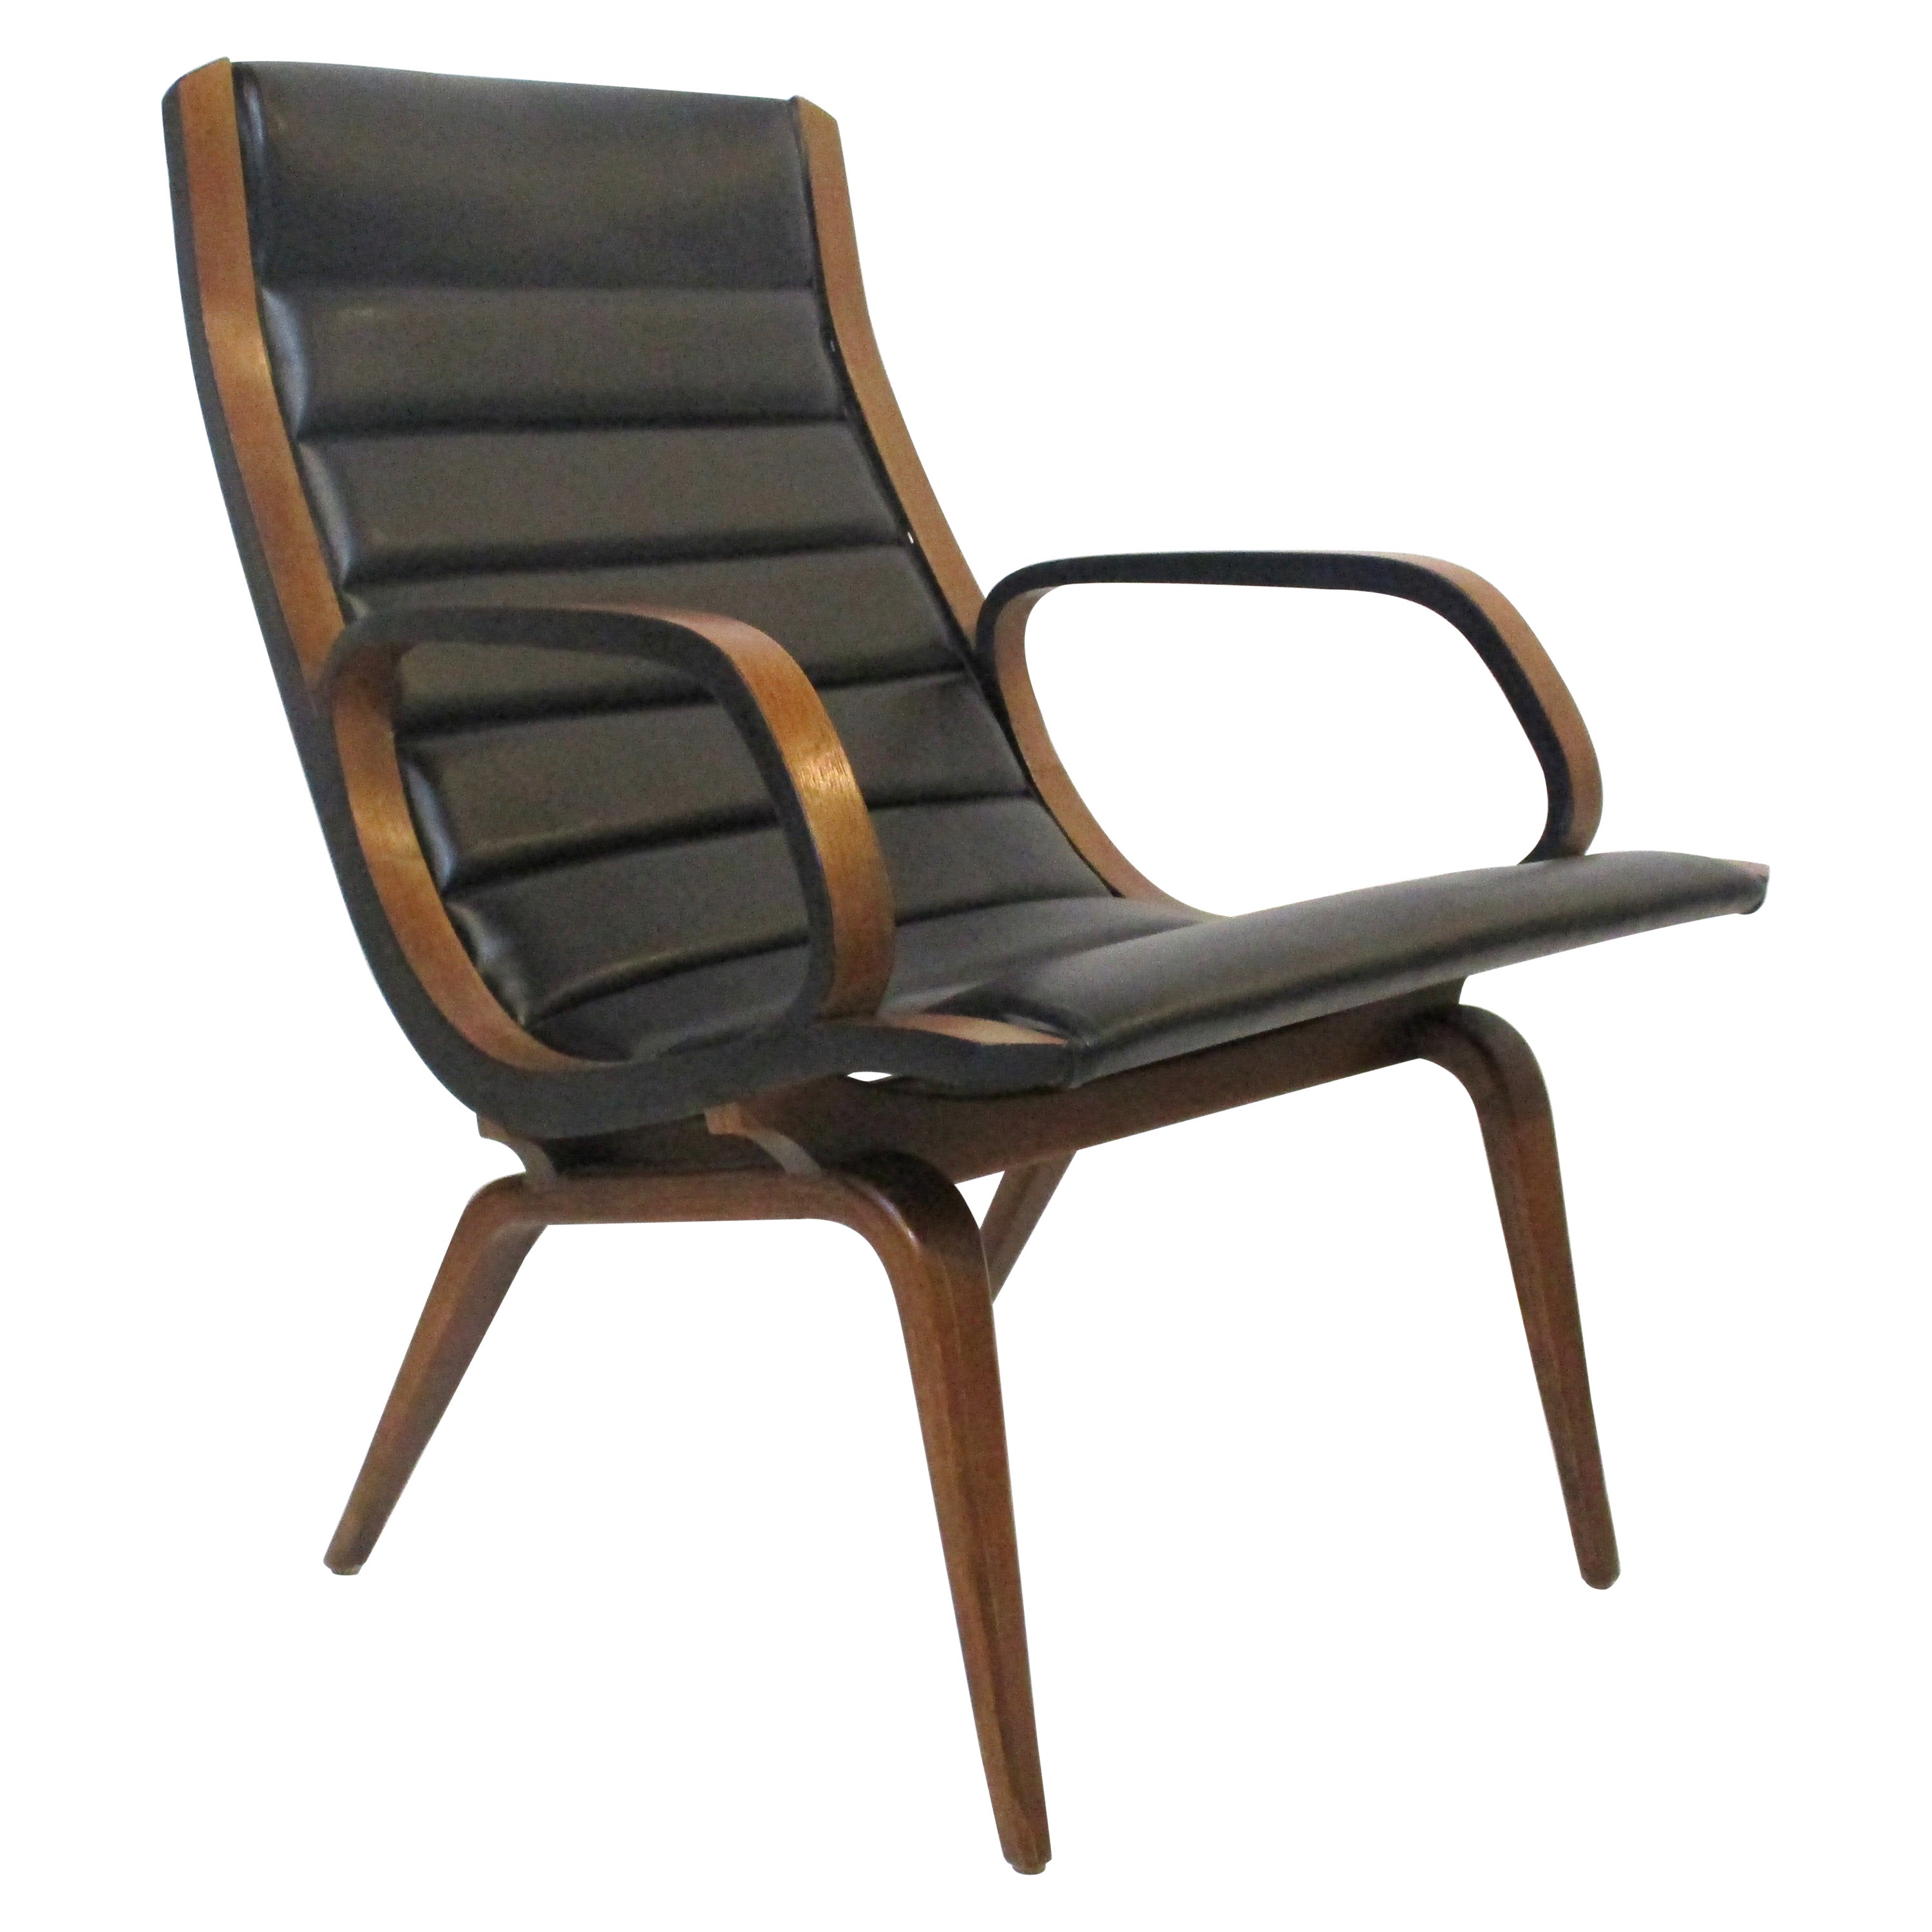 Rare Sculptural Arm / Lounge Chair by Norman Chener for Plycraft For Sale